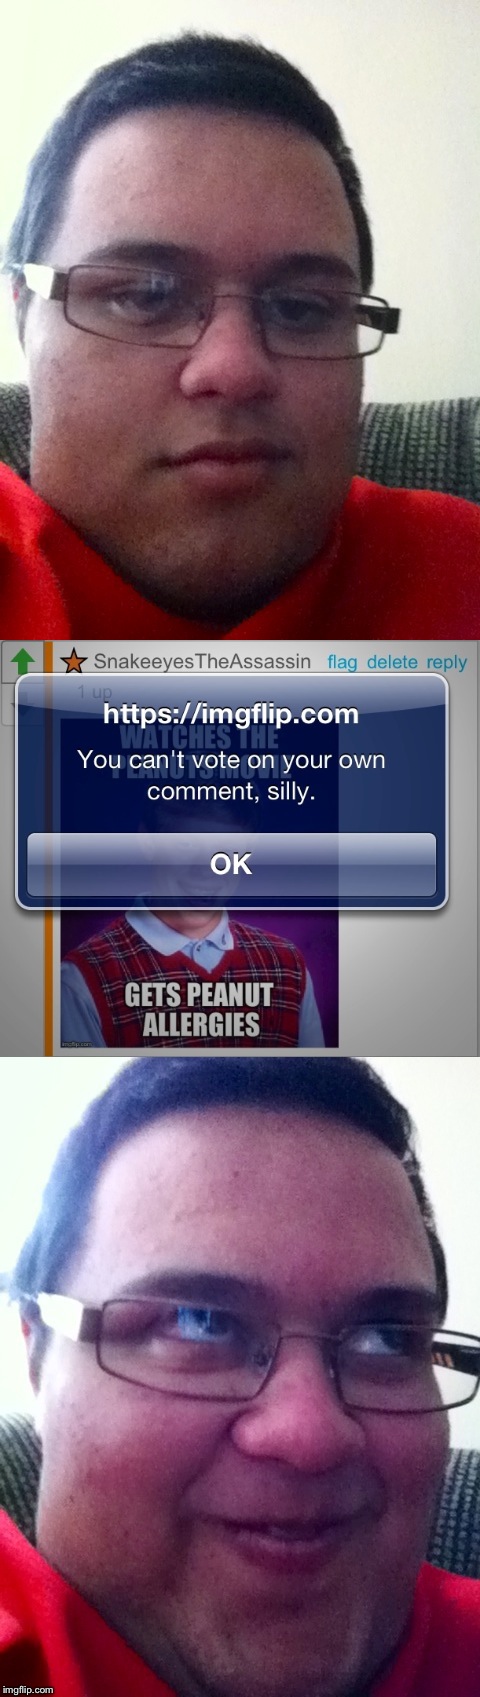 Can't vote yourself, silly | image tagged in memes,so true memes | made w/ Imgflip meme maker